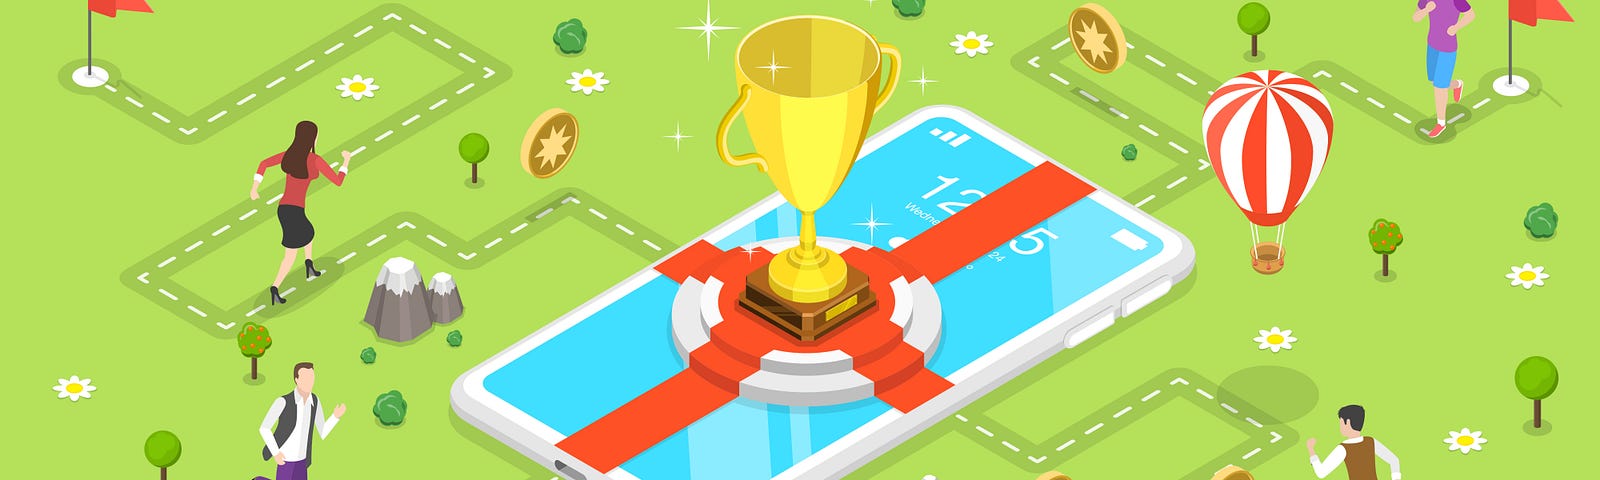 Skillshare embraces badges: how gamification promotes learning, by Daley  Wilhelm